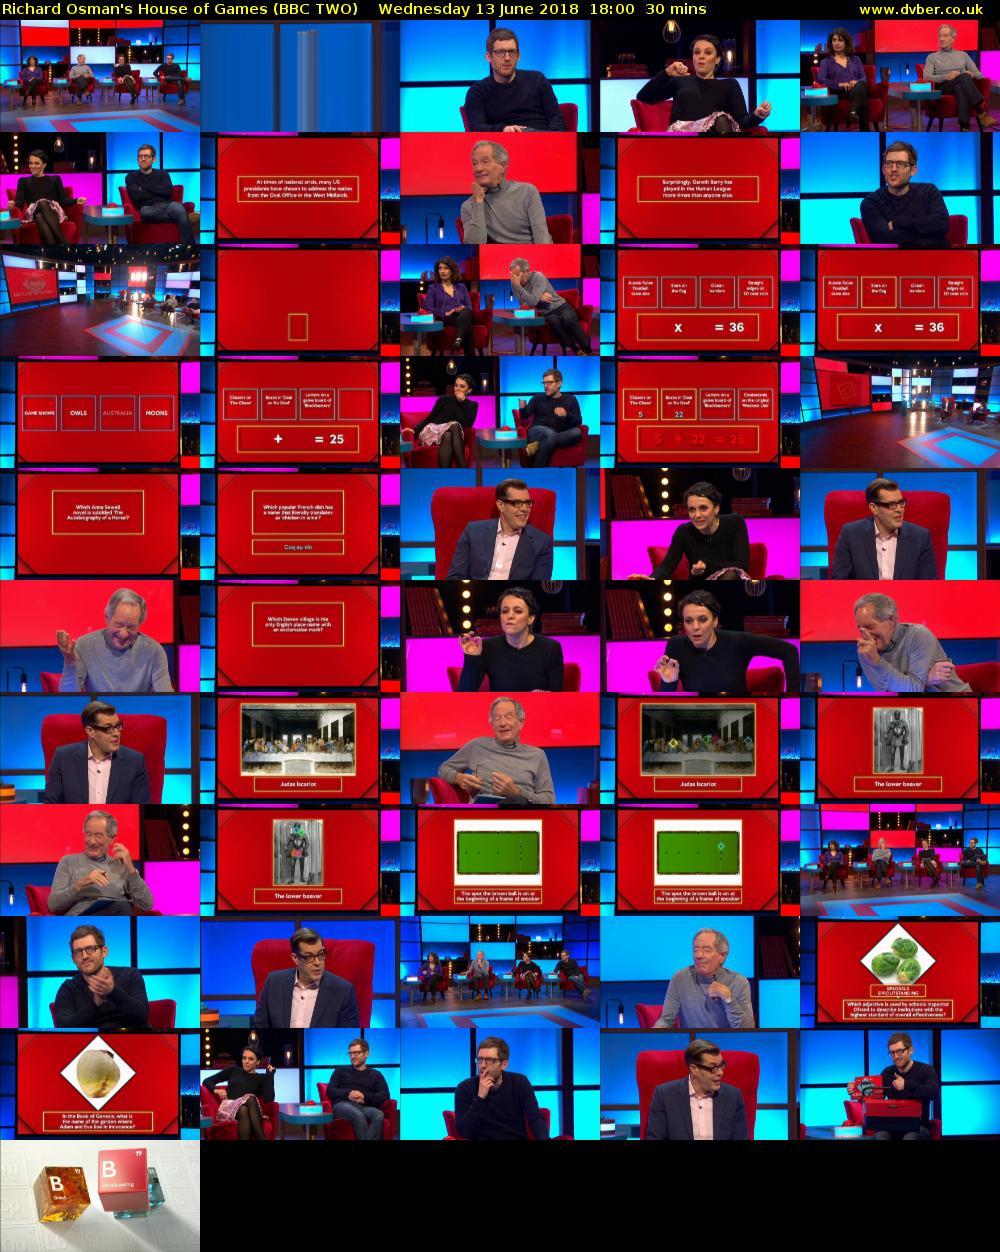 Richard Osman's House of Games (BBC TWO) Wednesday 13 June 2018 18:00 - 18:30